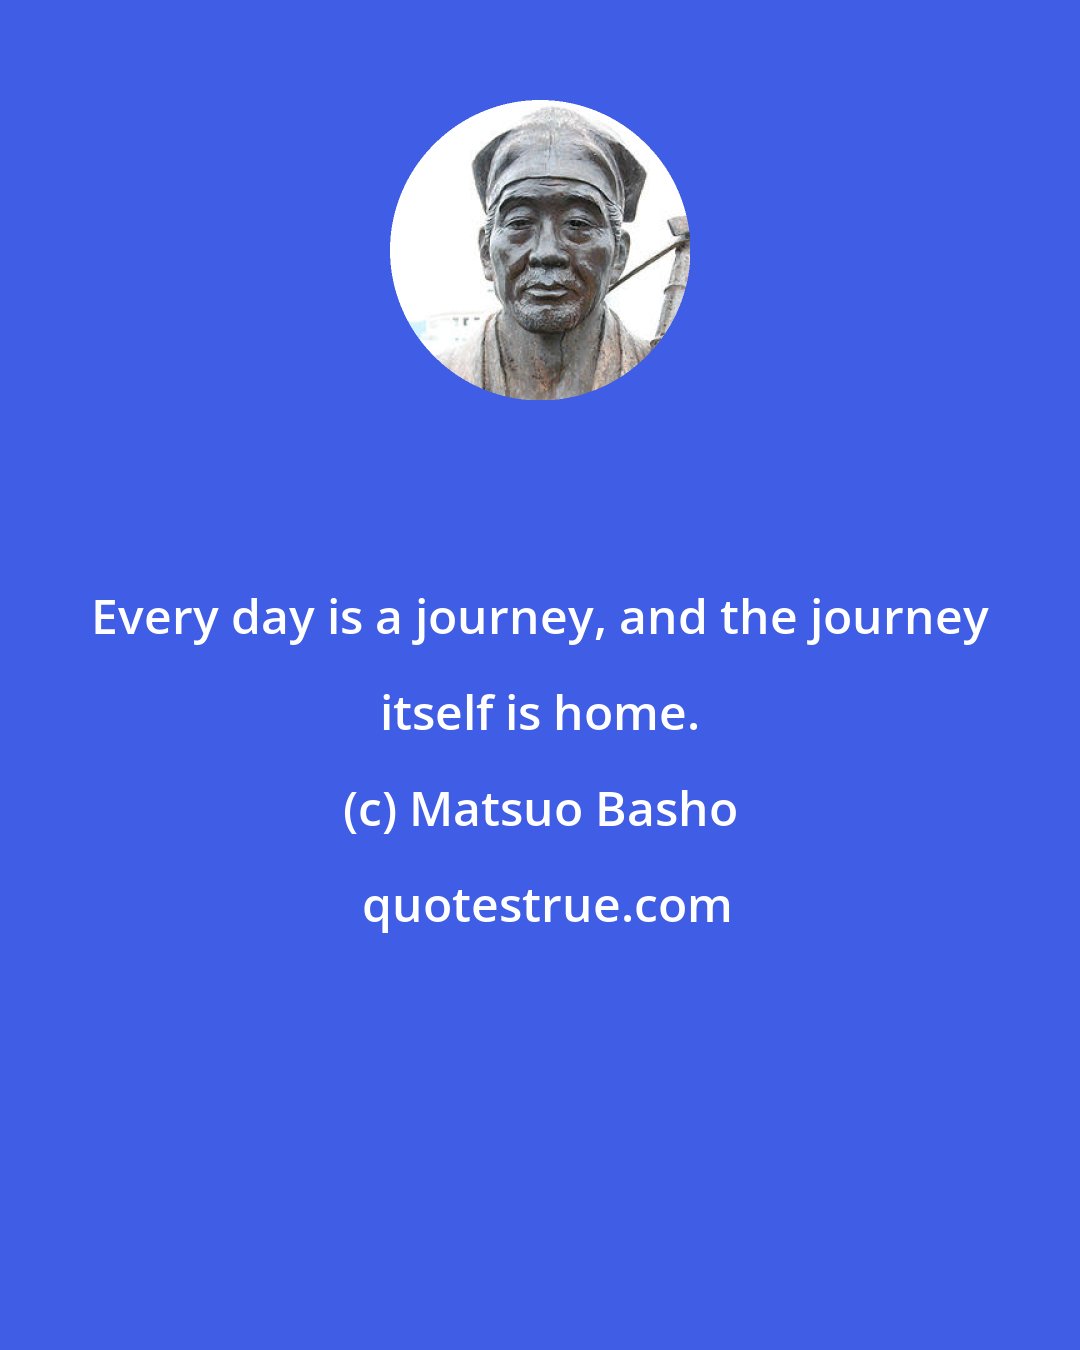 Matsuo Basho: Every day is a journey, and the journey itself is home.